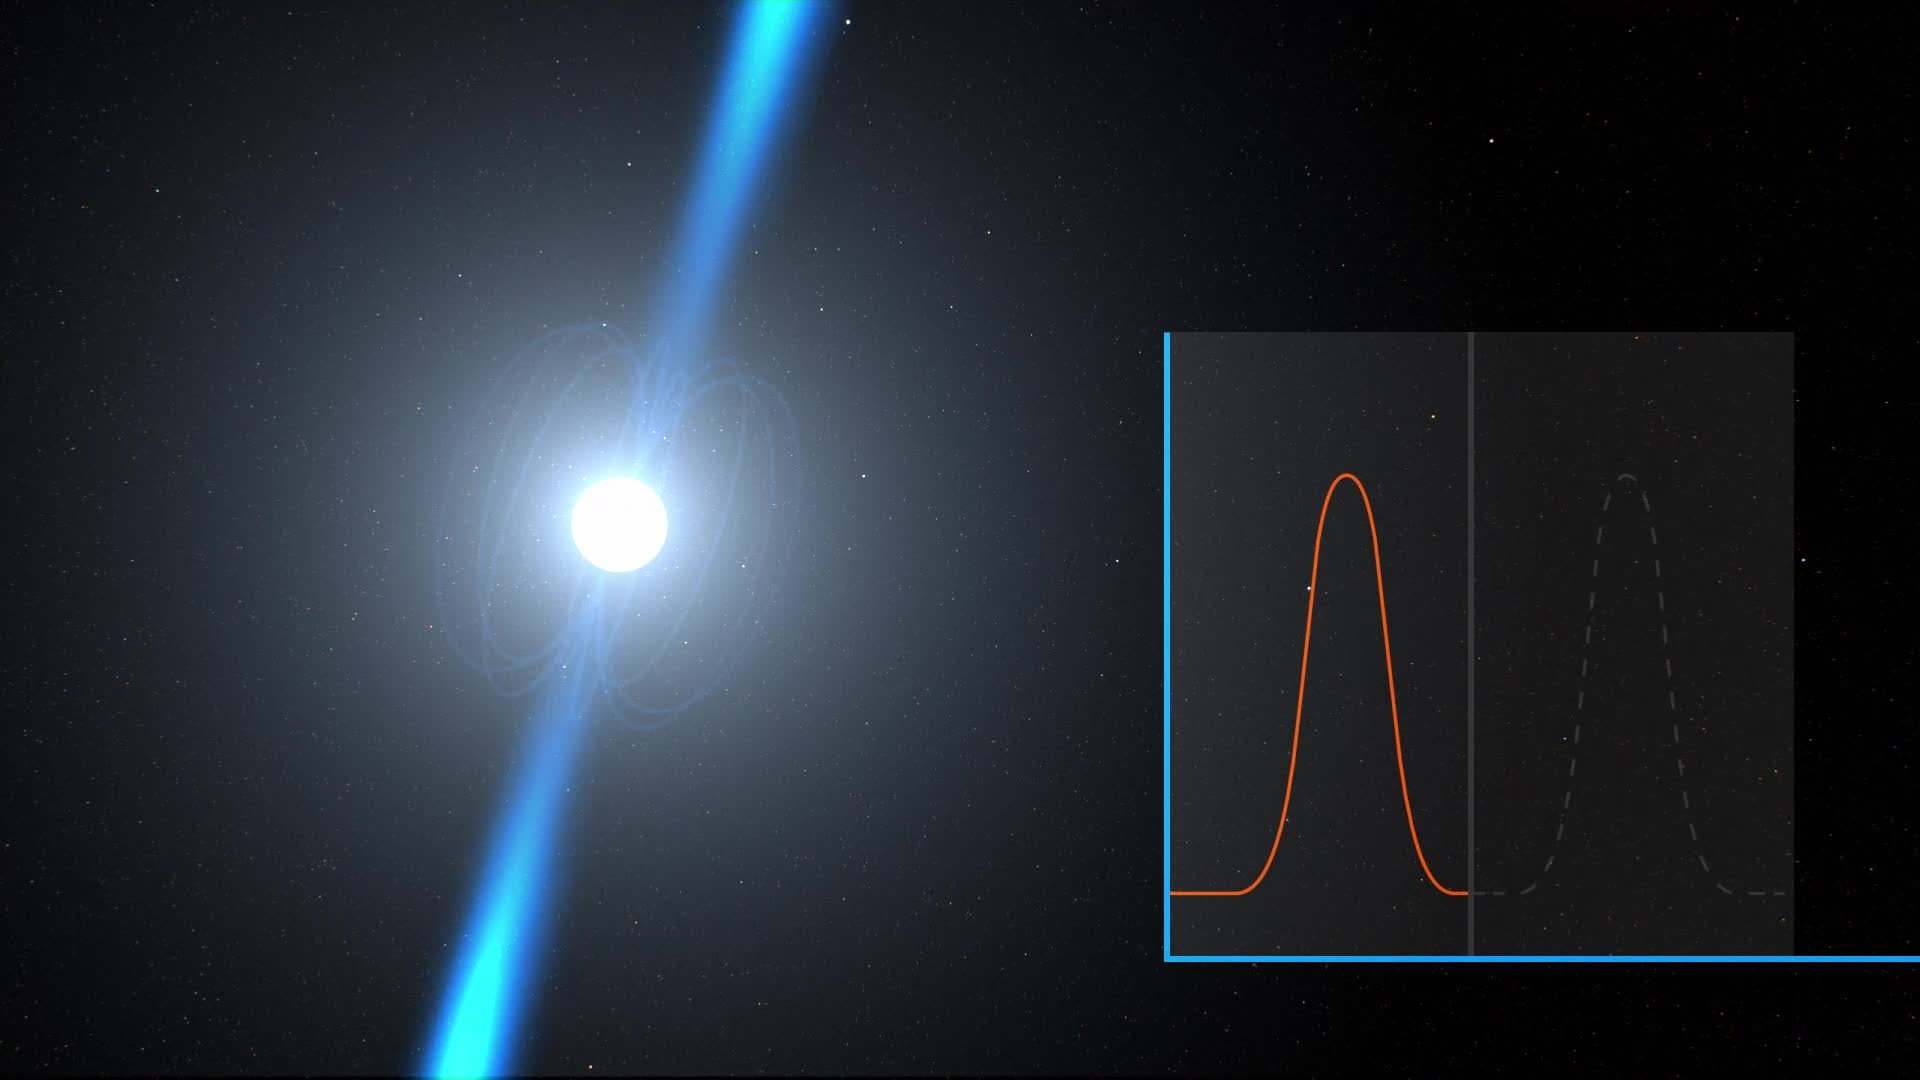 Pulsars are small spinning stars that emit pulses of radio waves that astronomers can detect from Earth. Credit: Swinburne Astronomy Productions.